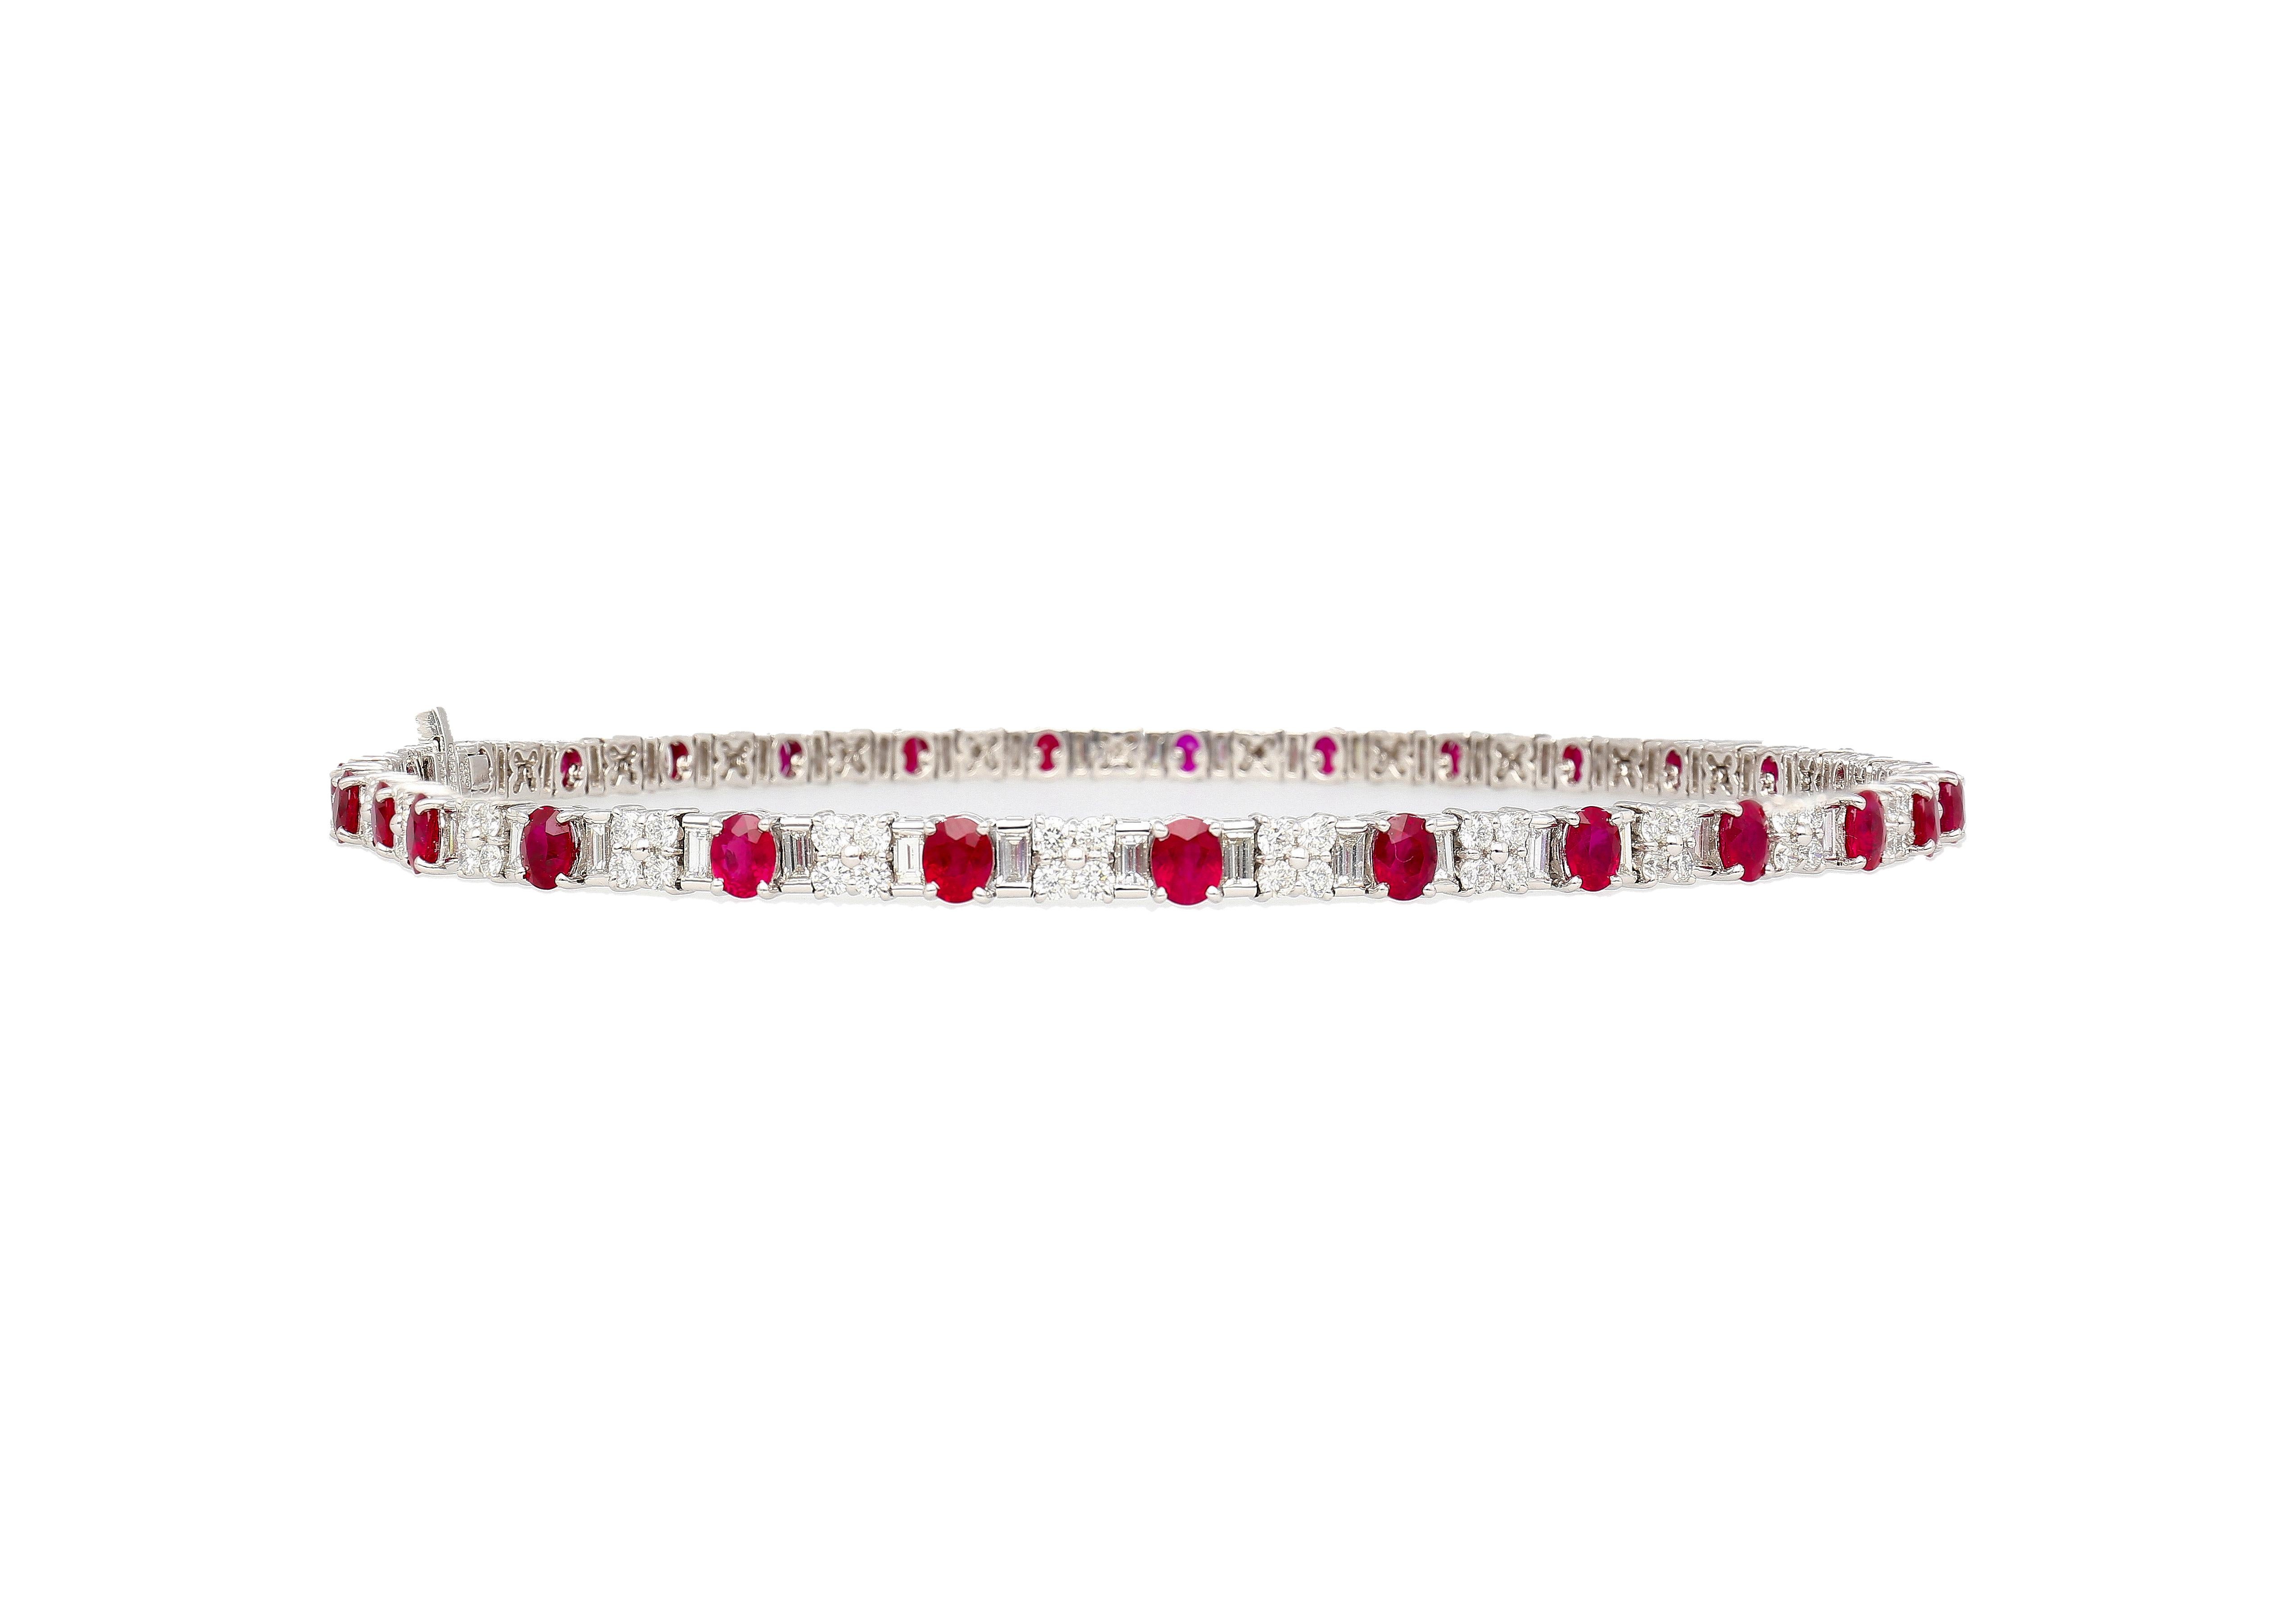 30 Carat Oval Cut Ruby & Mixed Cut Diamond Tennis Necklace in Platinum For Sale 2